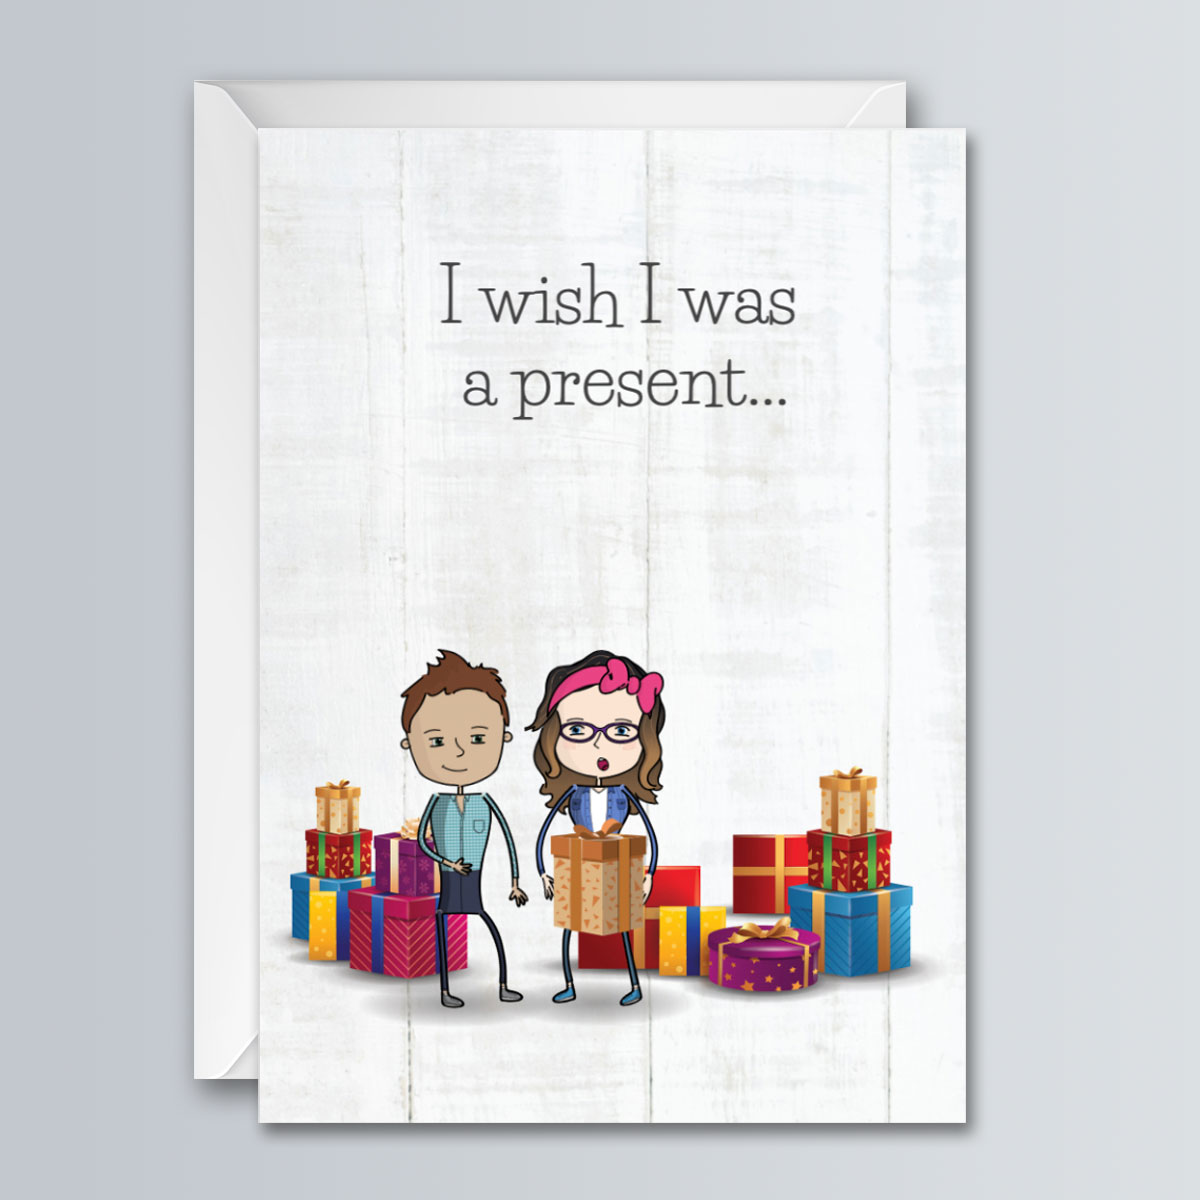 Wish I was a present - Christmas - Greeting Card